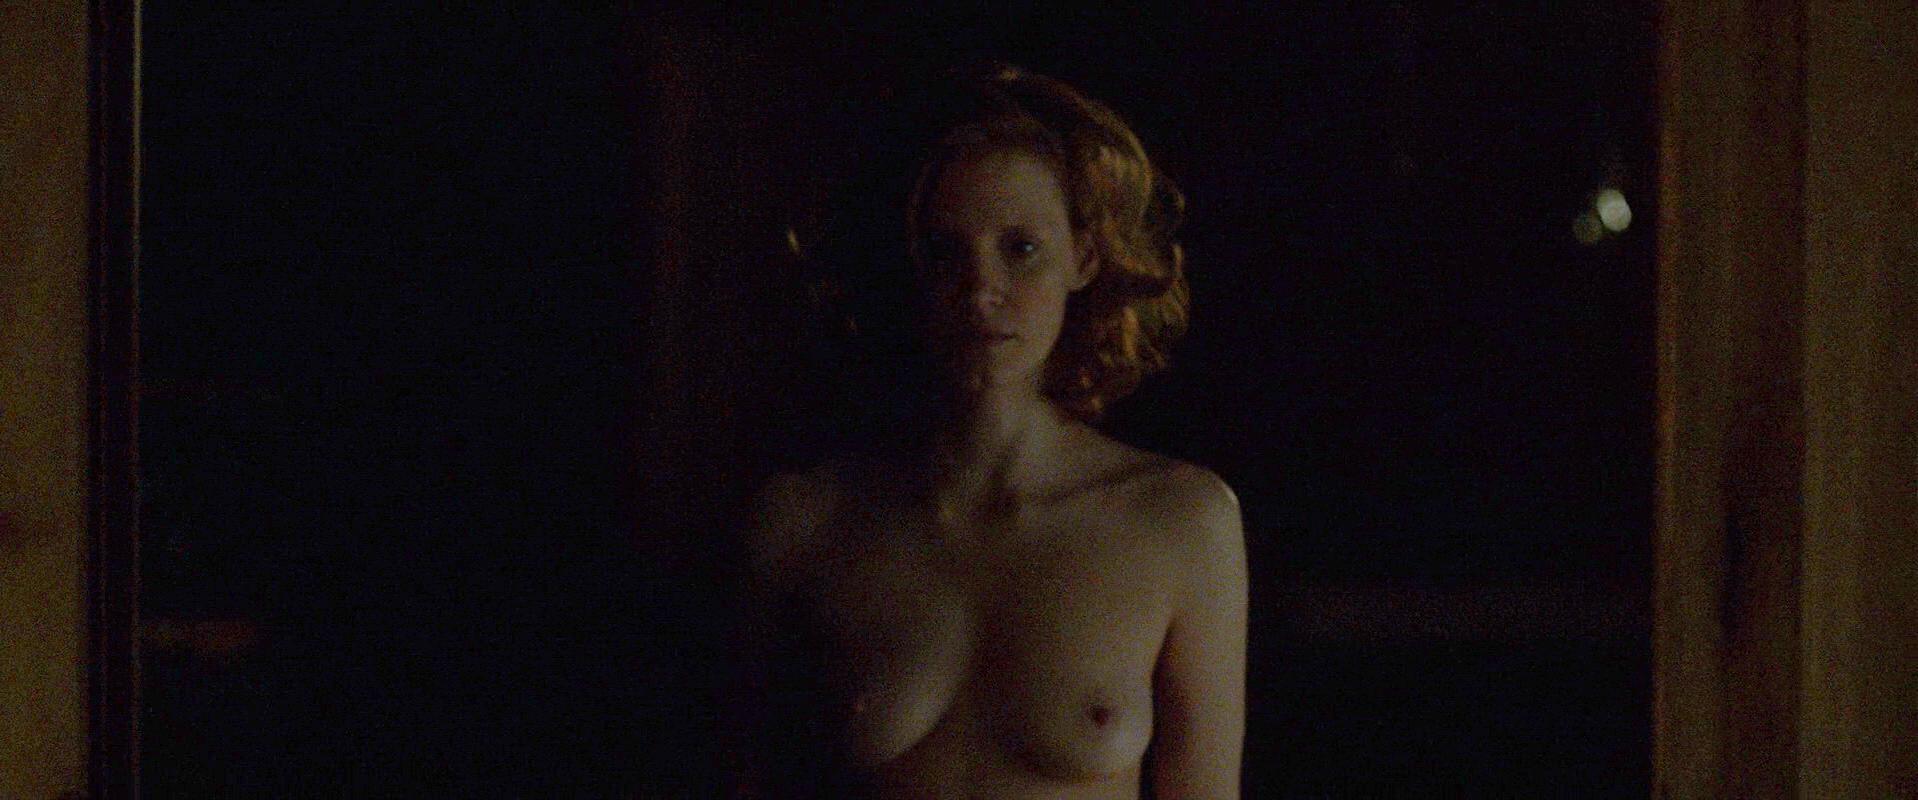 Jessica Chastain nude - Lawless (2012)